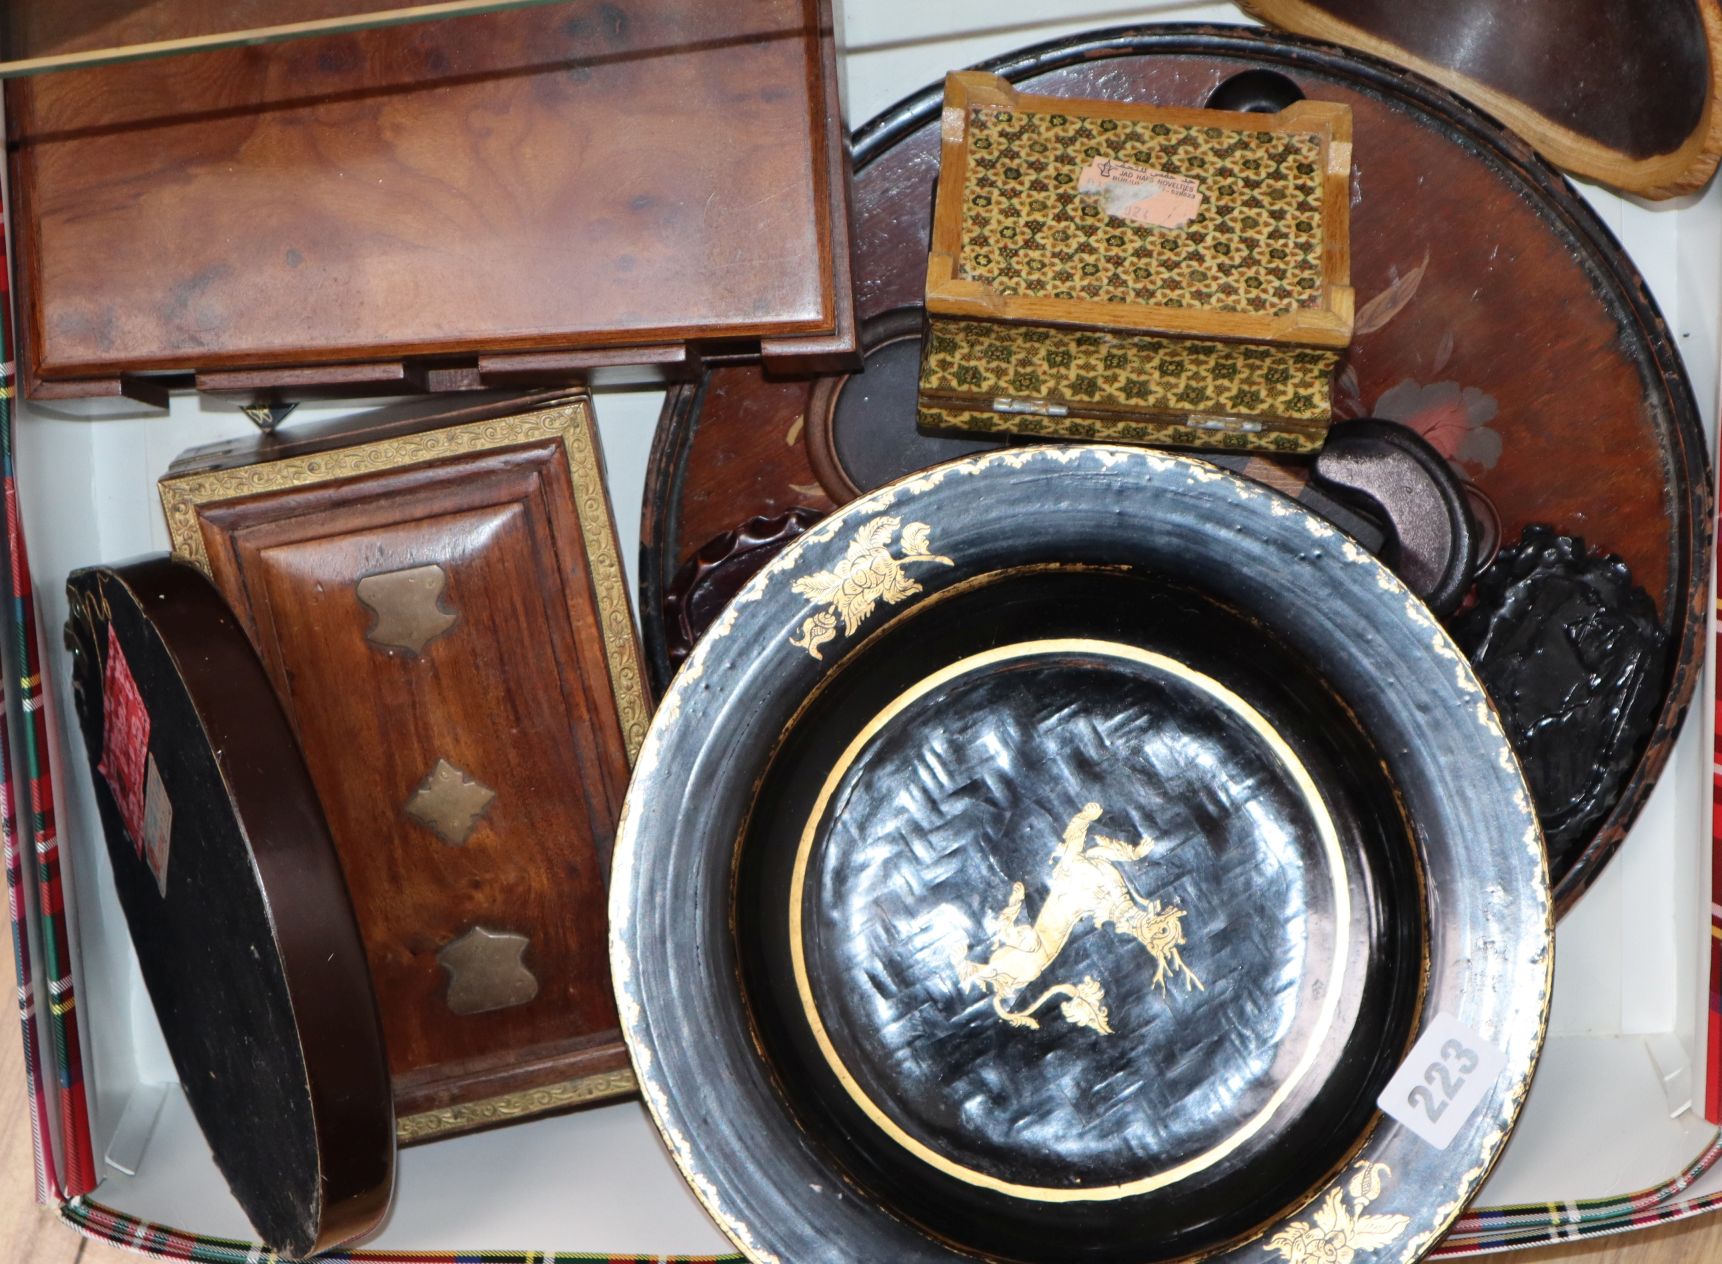 A group of lacquer and wood wares